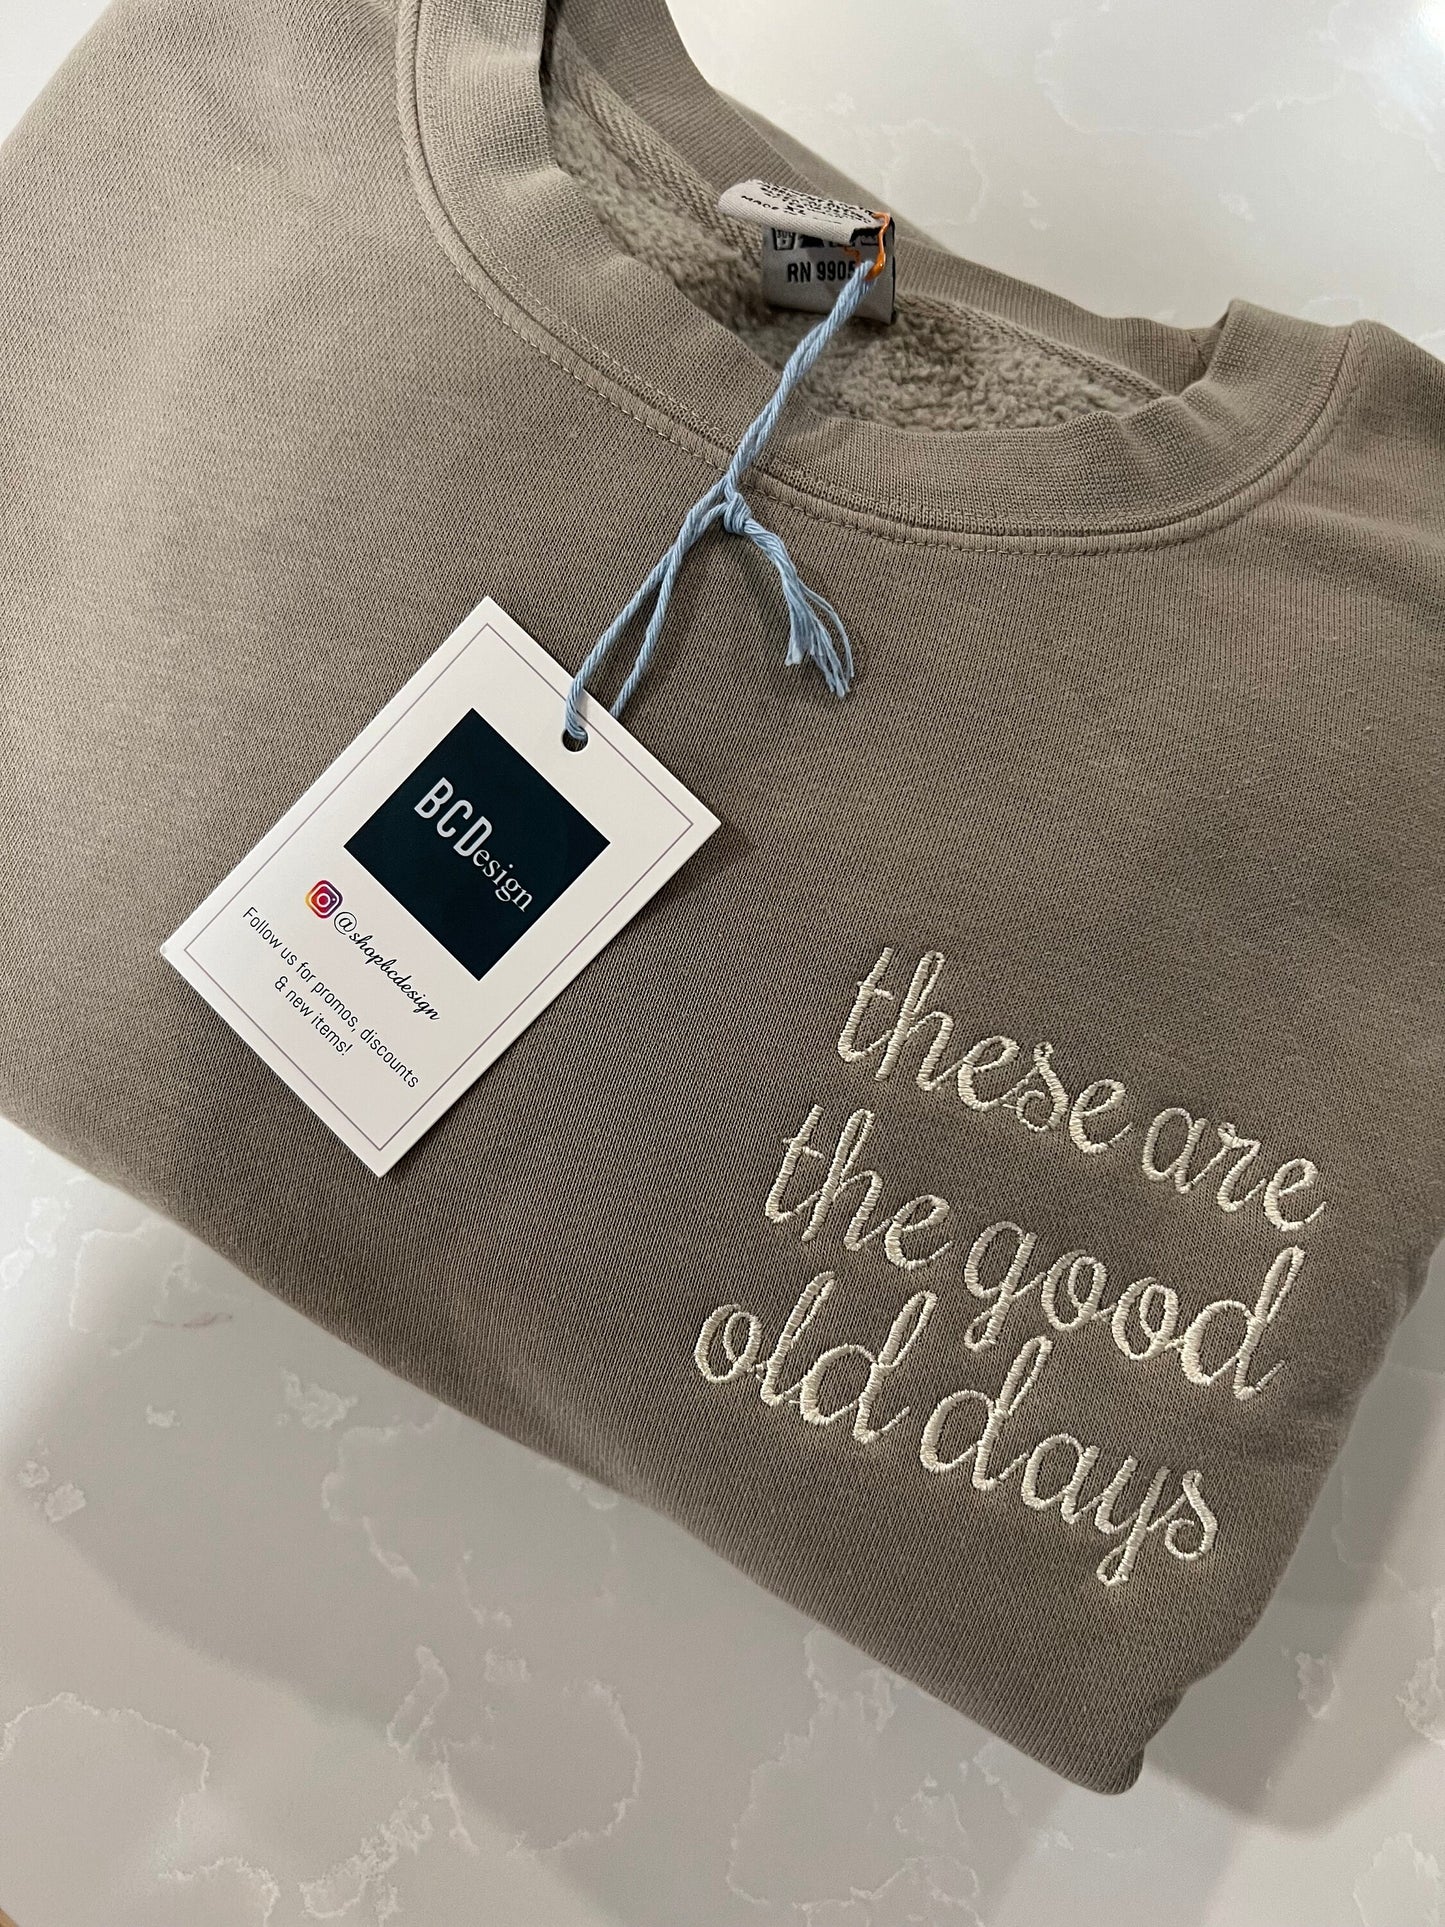 Cute Quote Sweatshirt The Good Old Days Gift For Her Birthday Gift